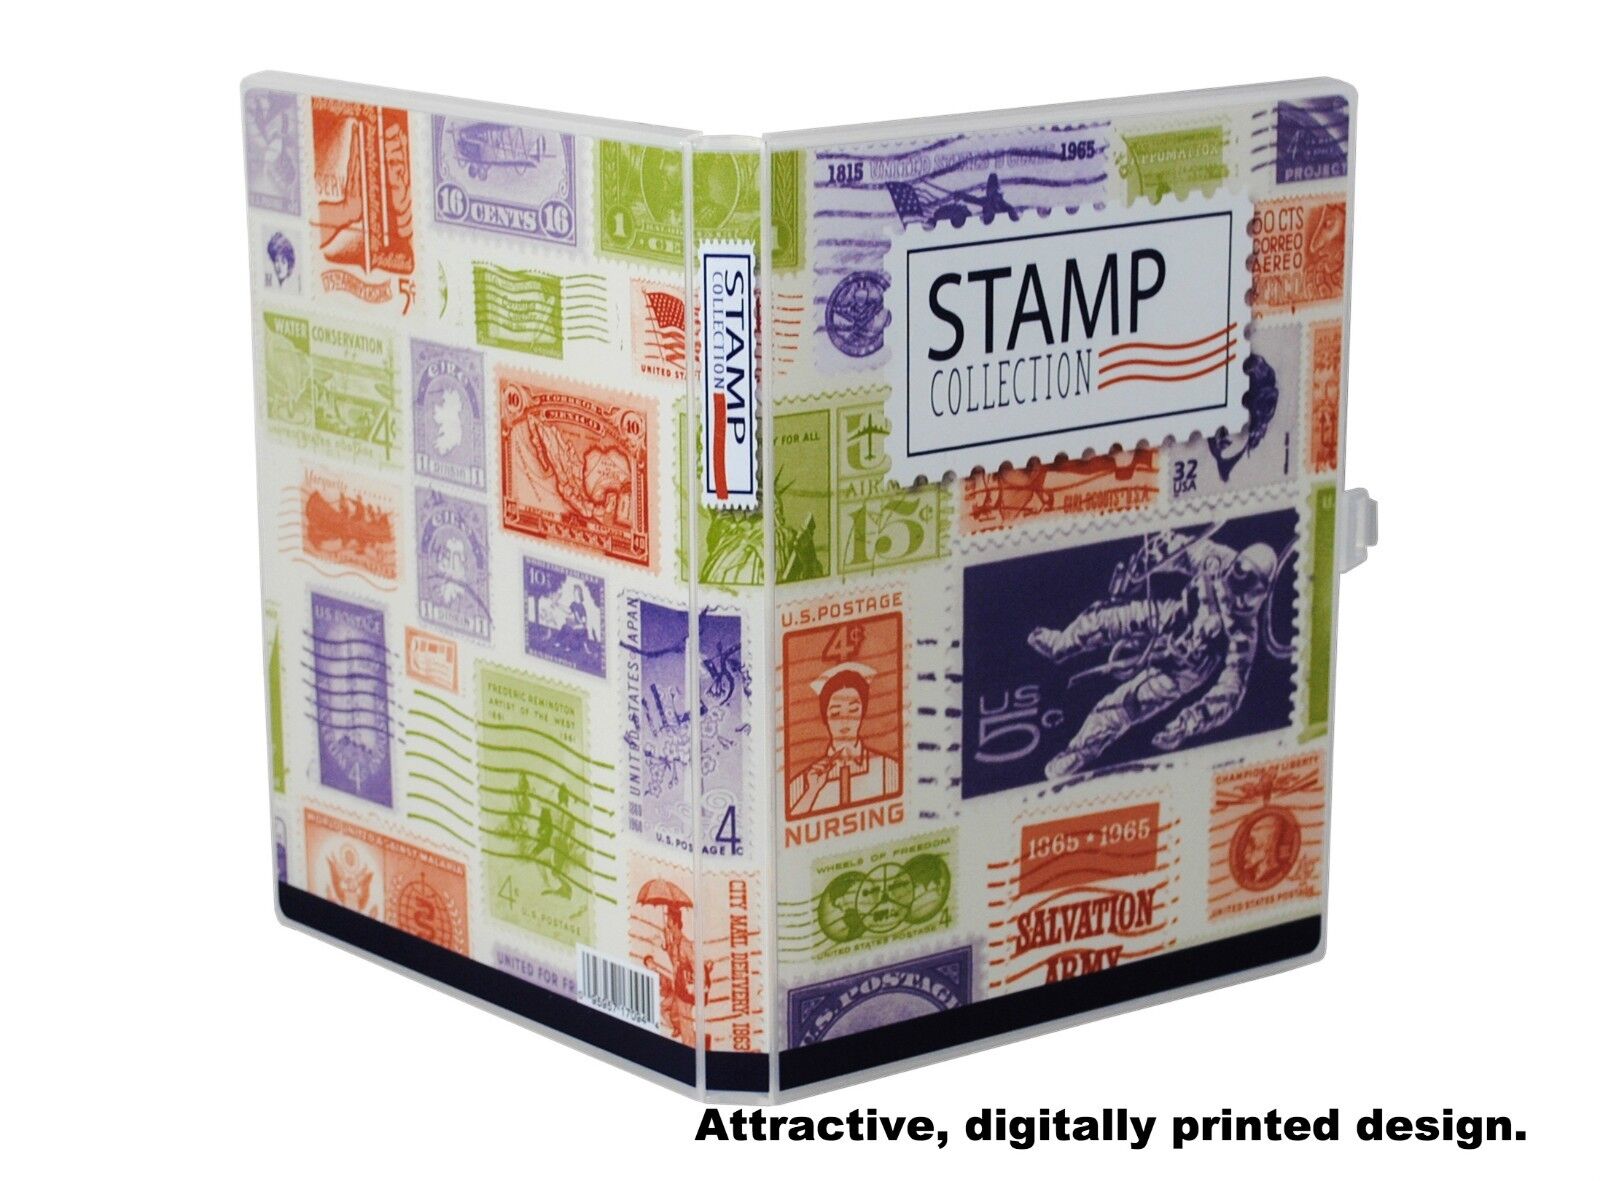 Stamp Collection Kit/Album, w/ 10 Pages, Holds 150-300 Stamps (No Stamps) UniKeep 17094 - фотография #7